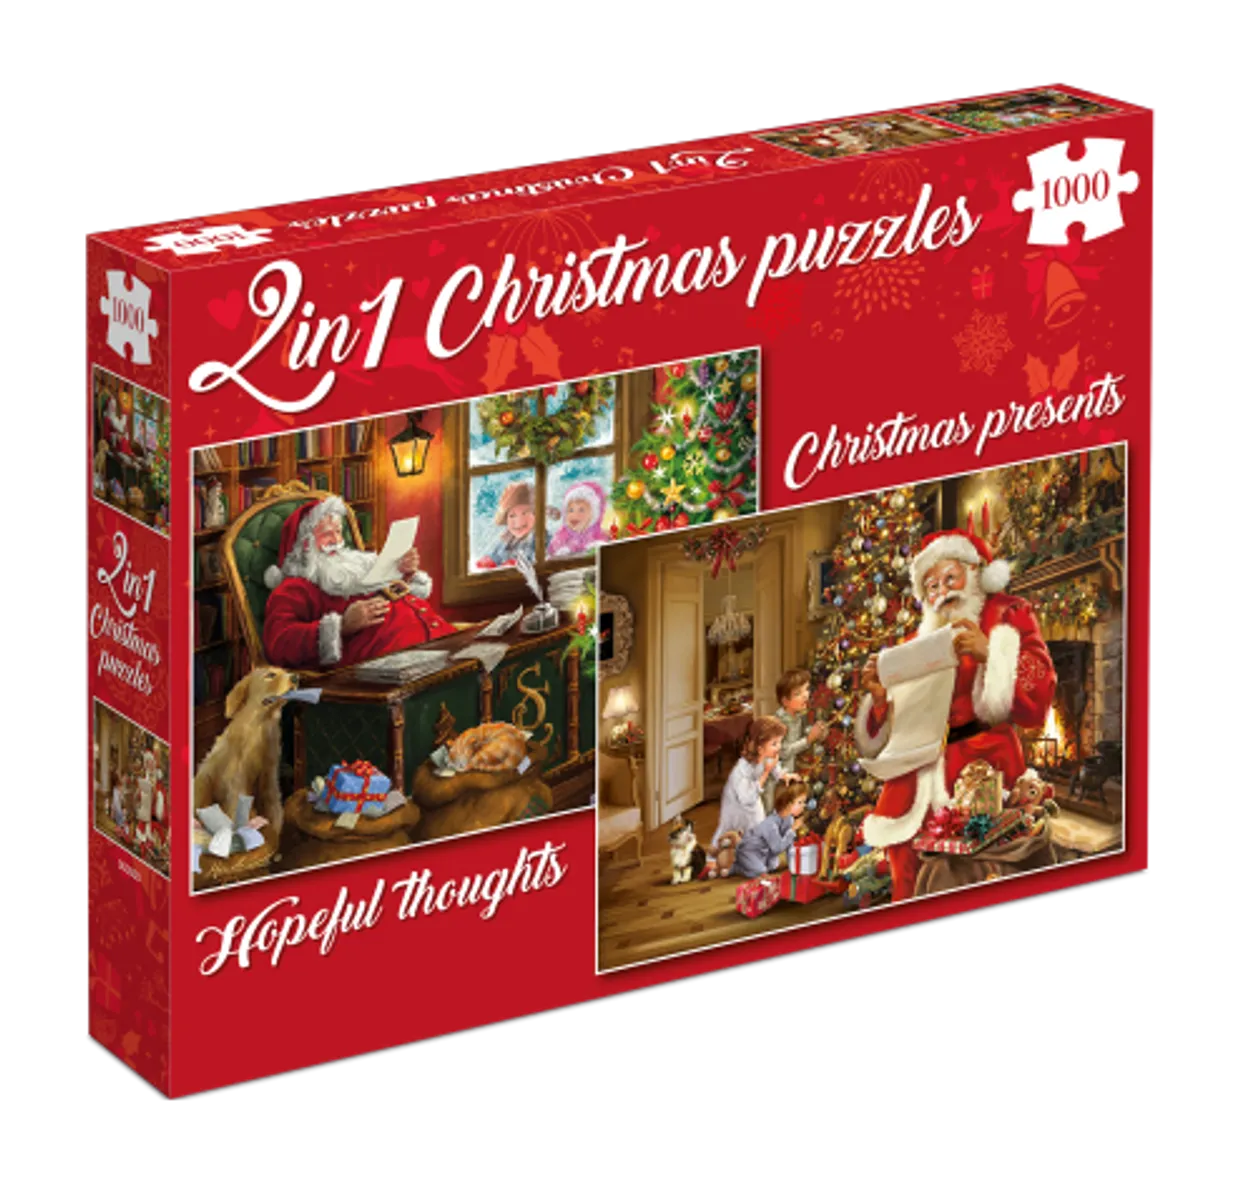 Puzzel - Christmas Presents & Hopeful Thoughts (2 x 1000)